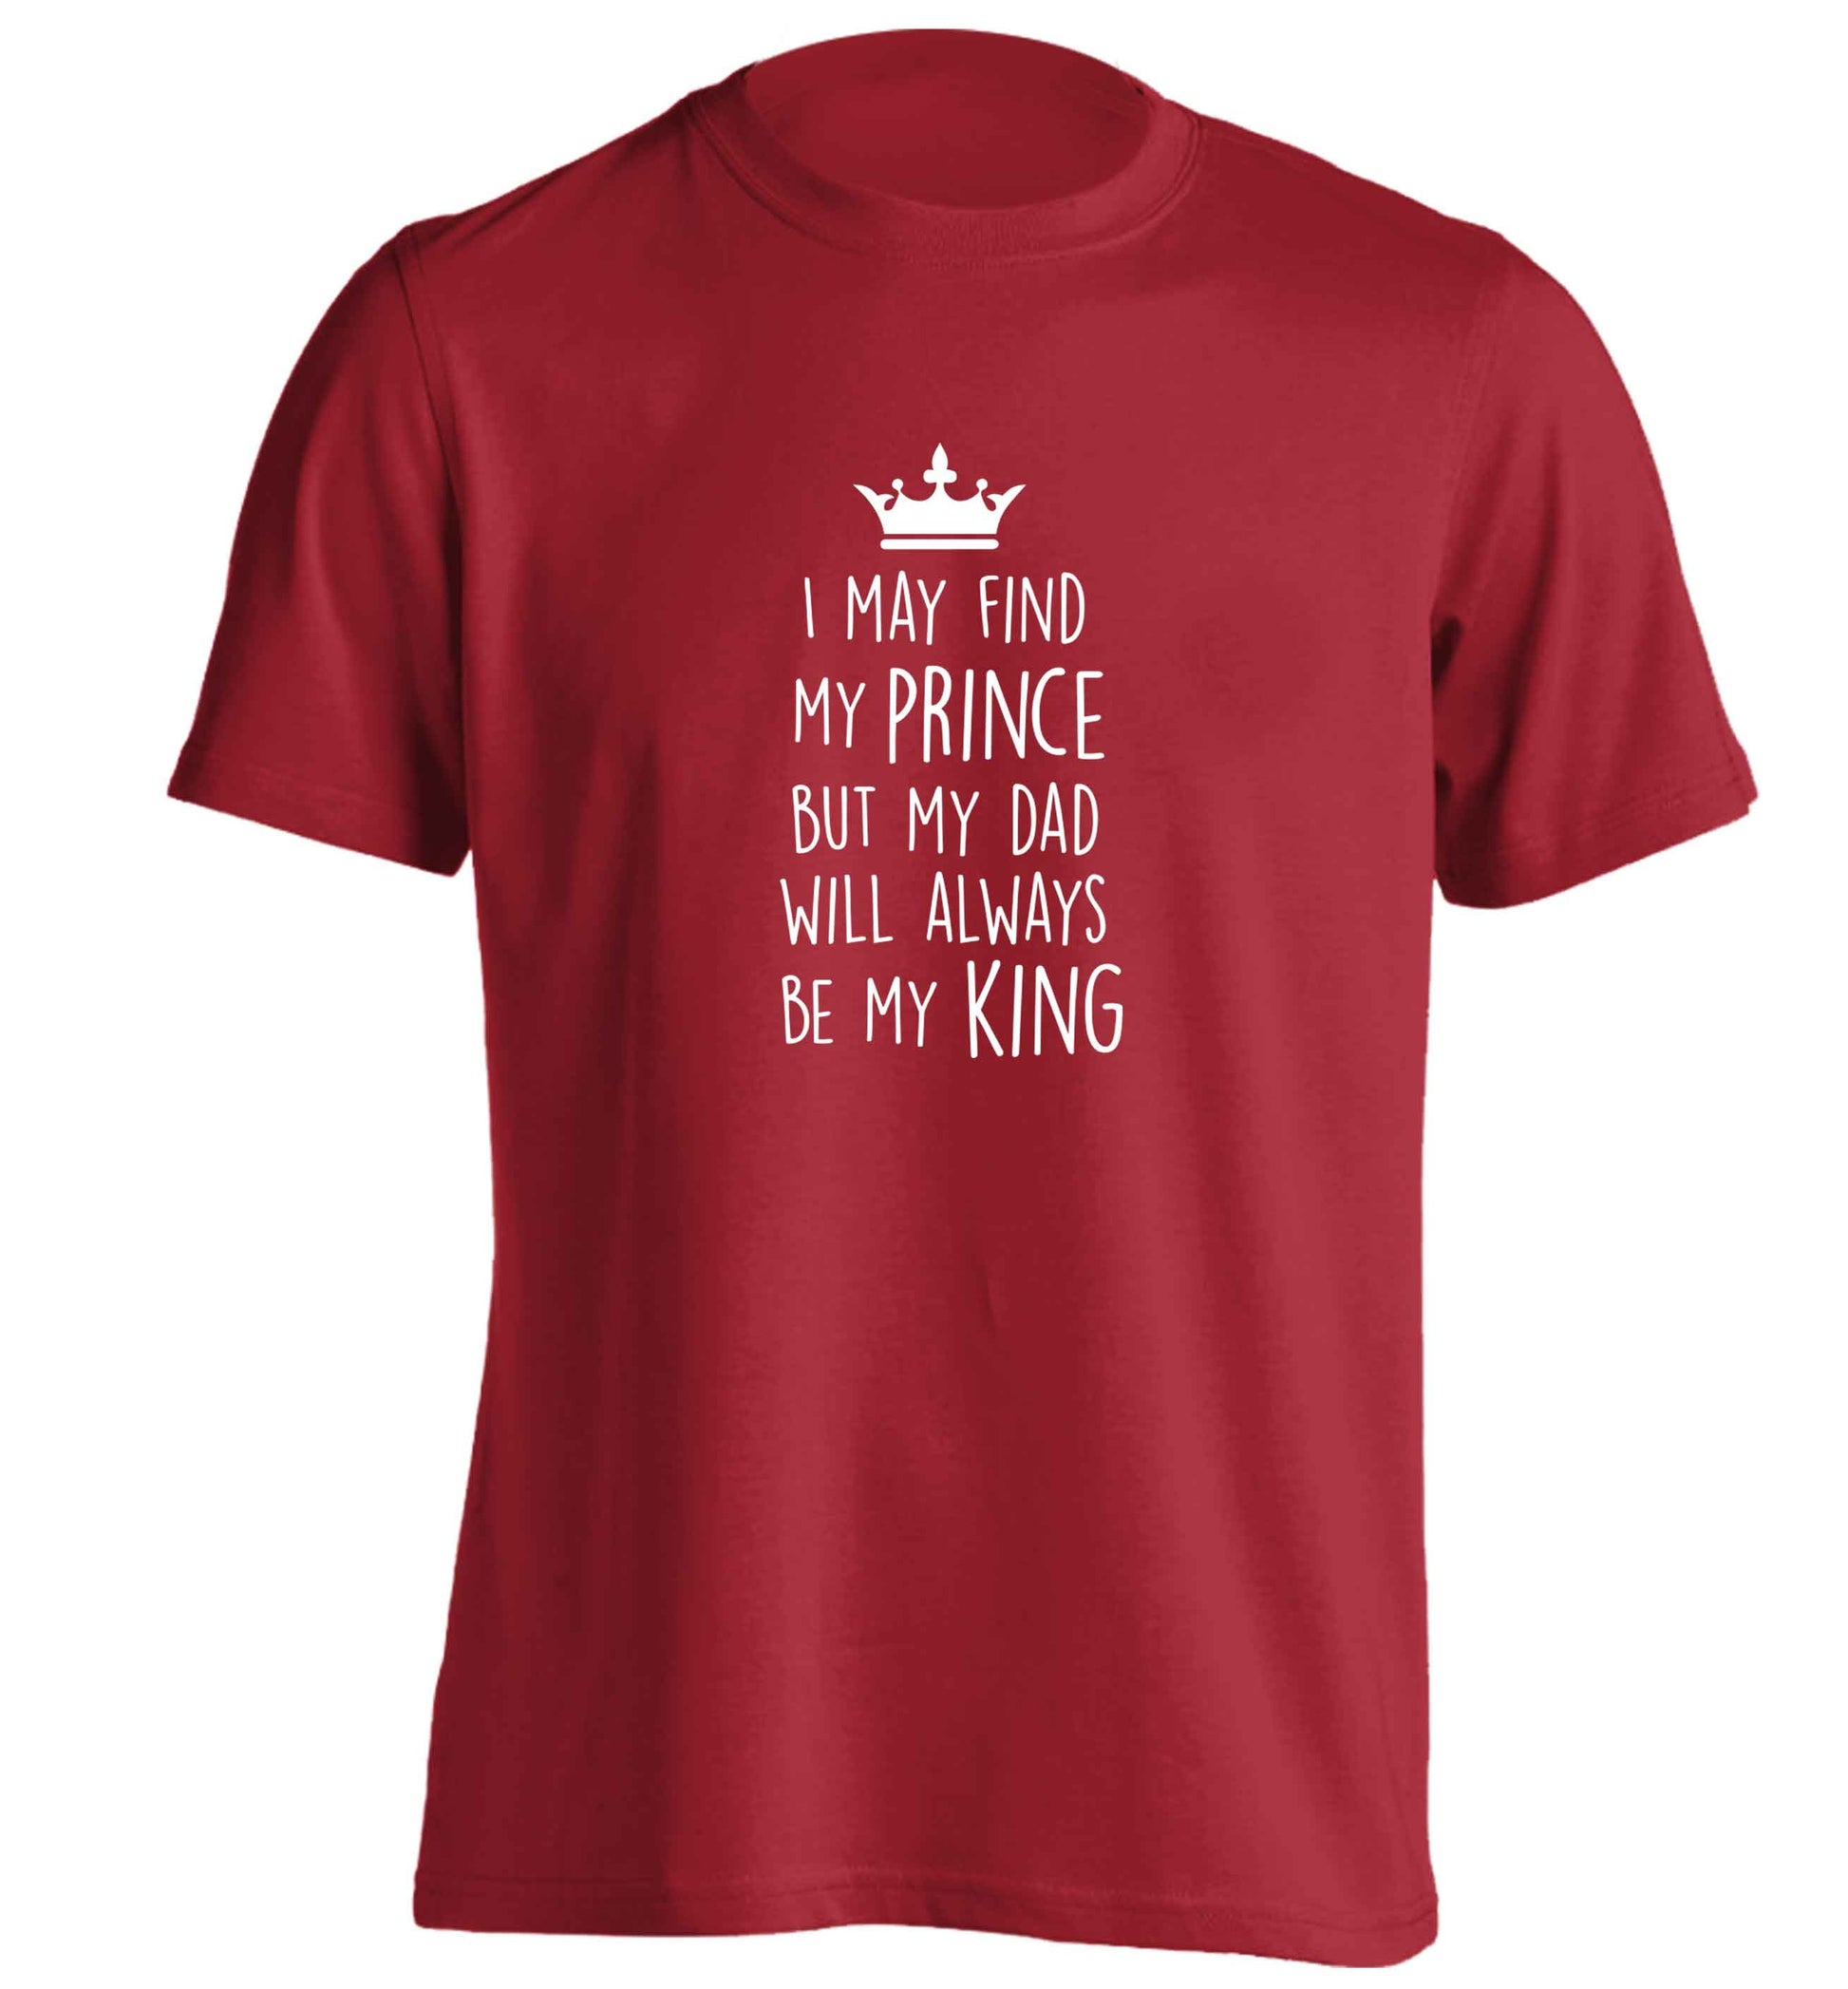 I may find my prince but my dad will always be my king adults unisex red Tshirt 2XL